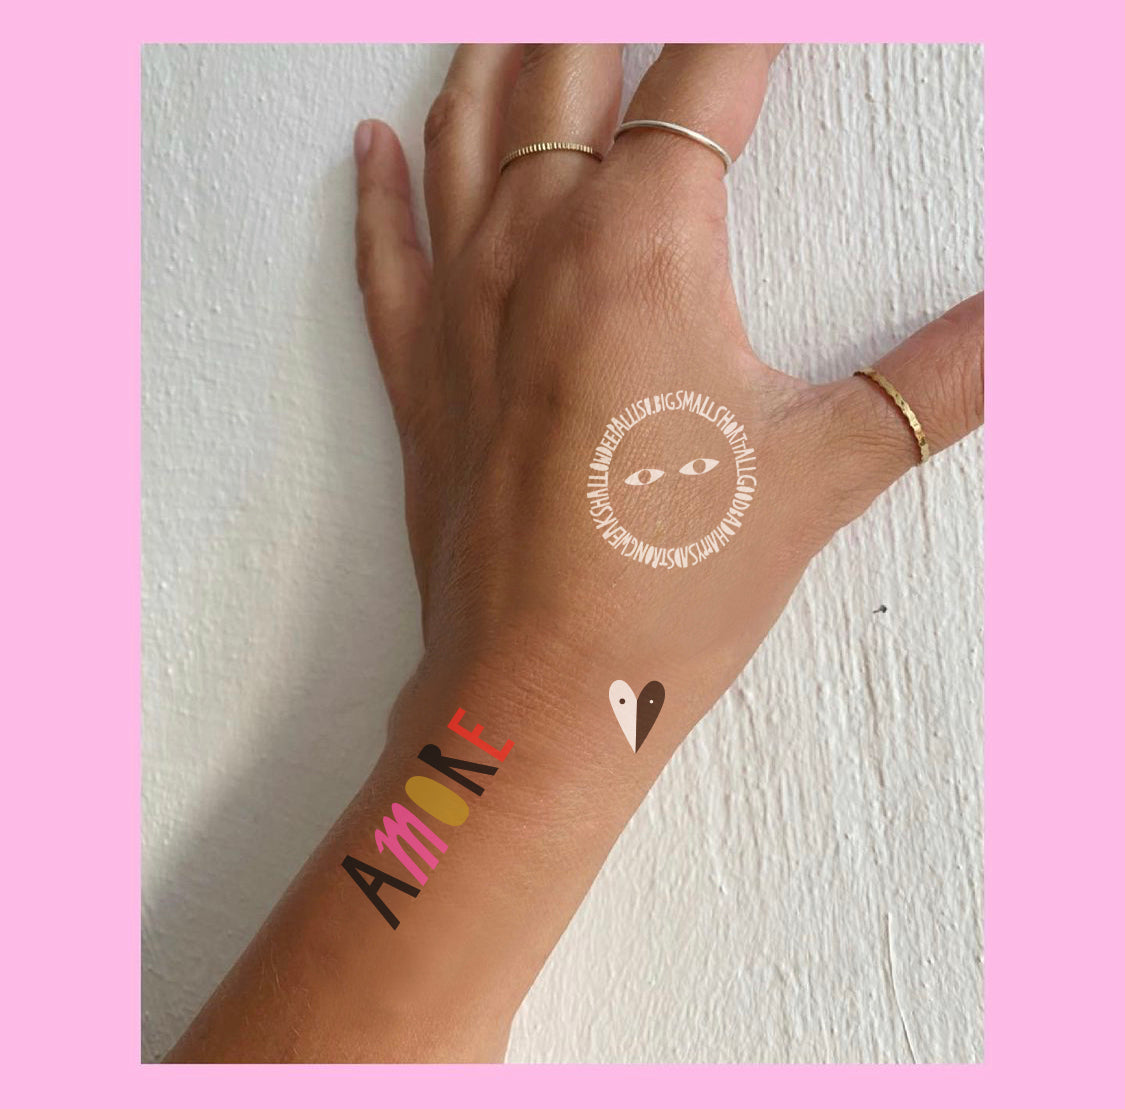 LIMITED EDITION THE COLORFUL CREW TEMPORARY TATTOOS